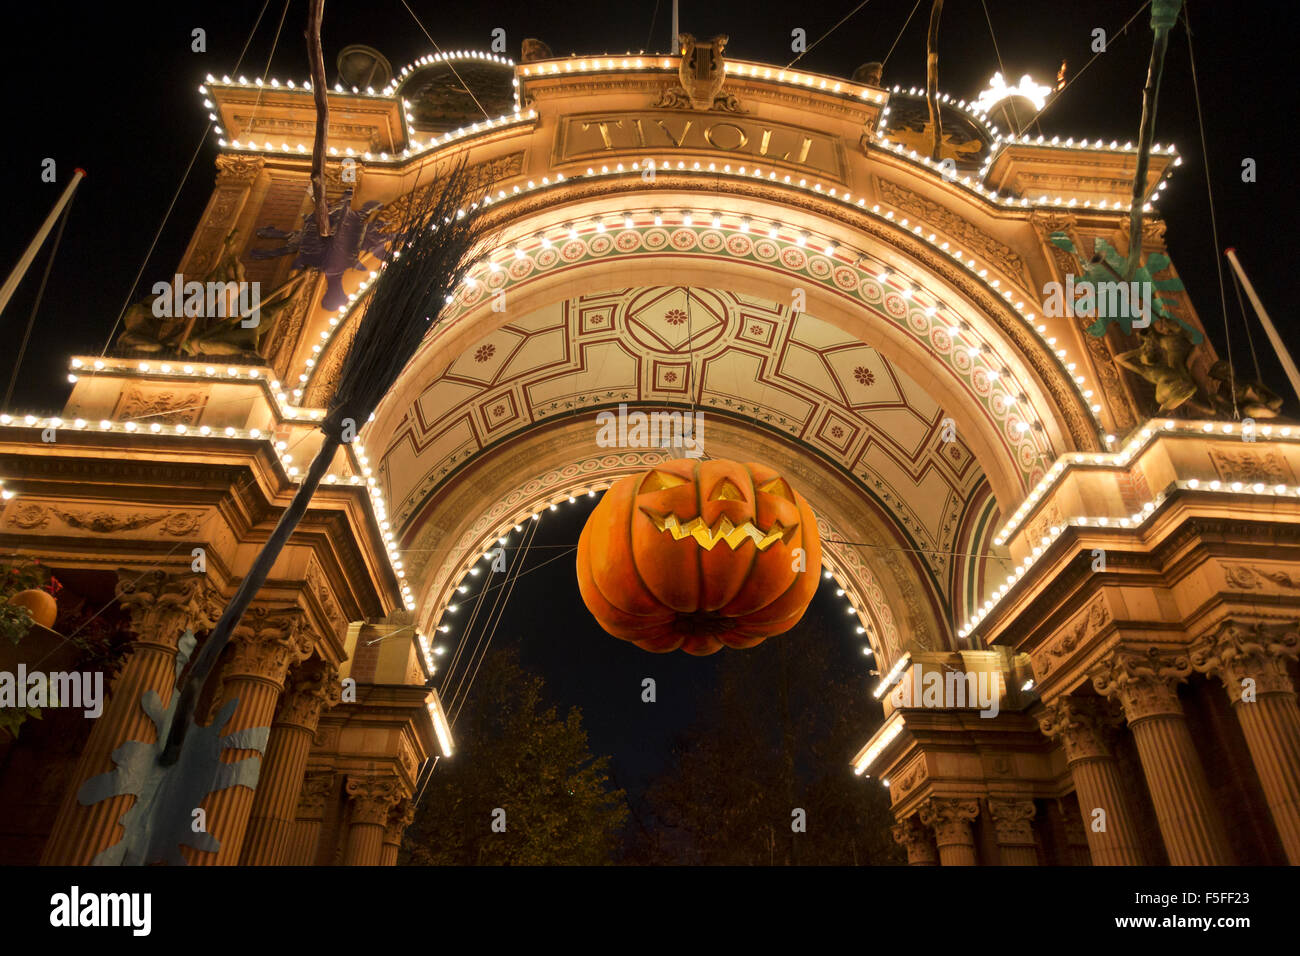 A large, spooky pumpkin head in the archway in the entrance to the Tivoli gardens in Copenhagen on a dark Halloween night Stock Photo